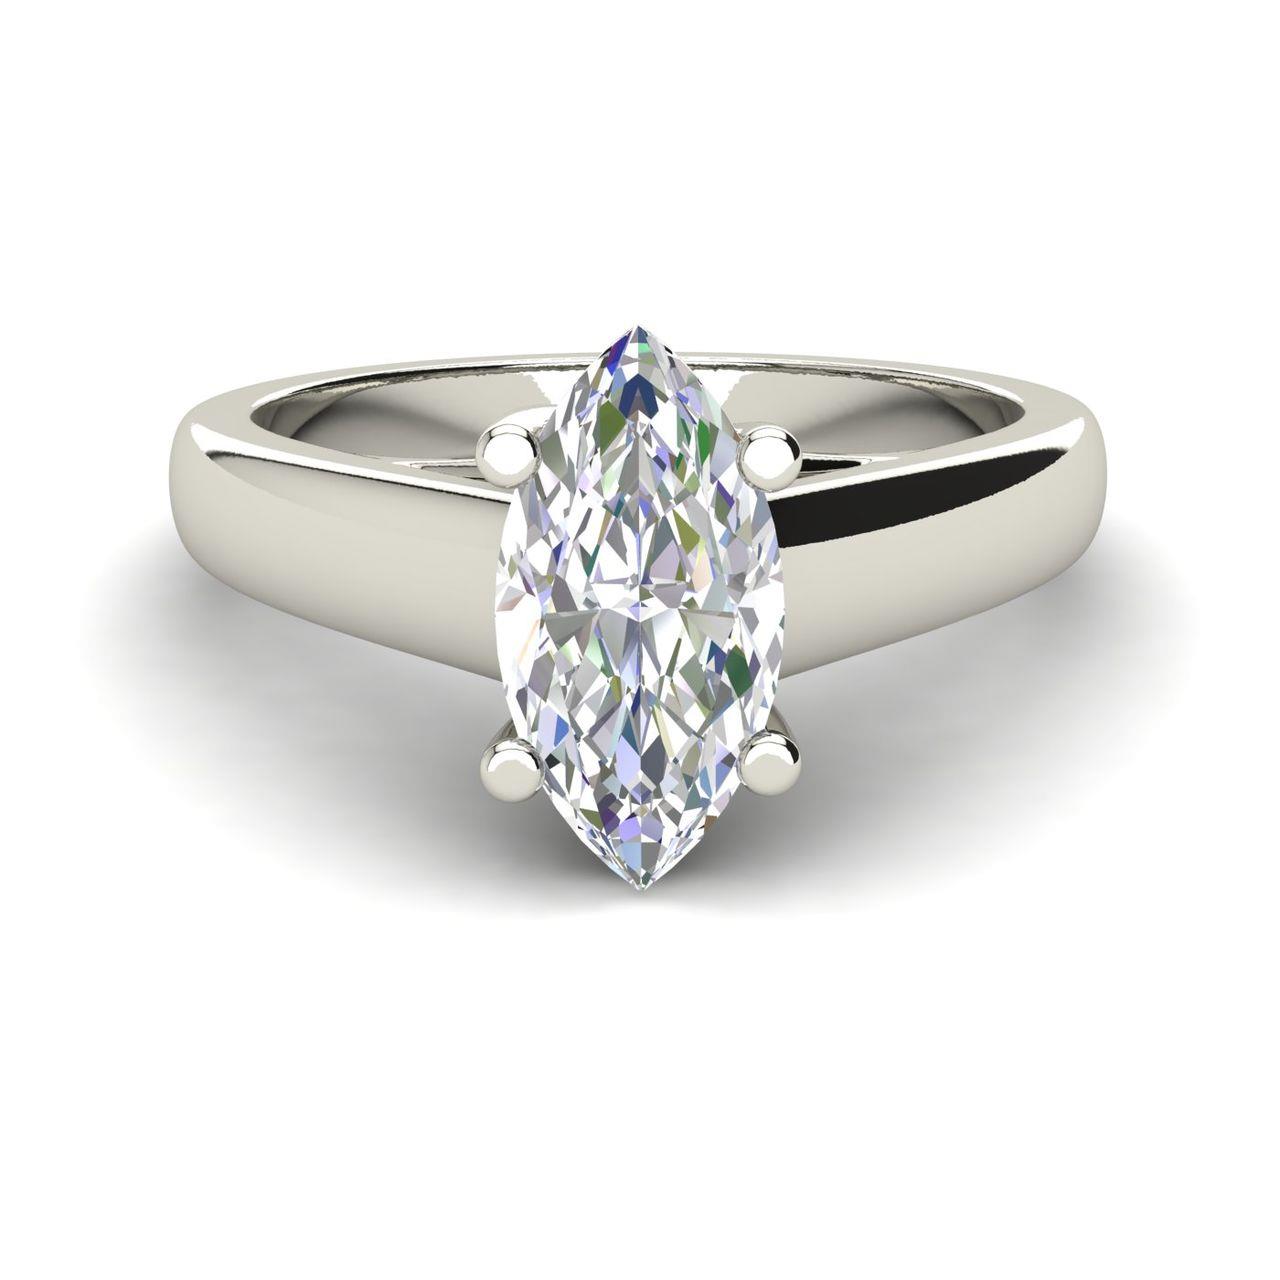 Solitaire 1 Carat Marquise Cut Diamond Engagement Ring